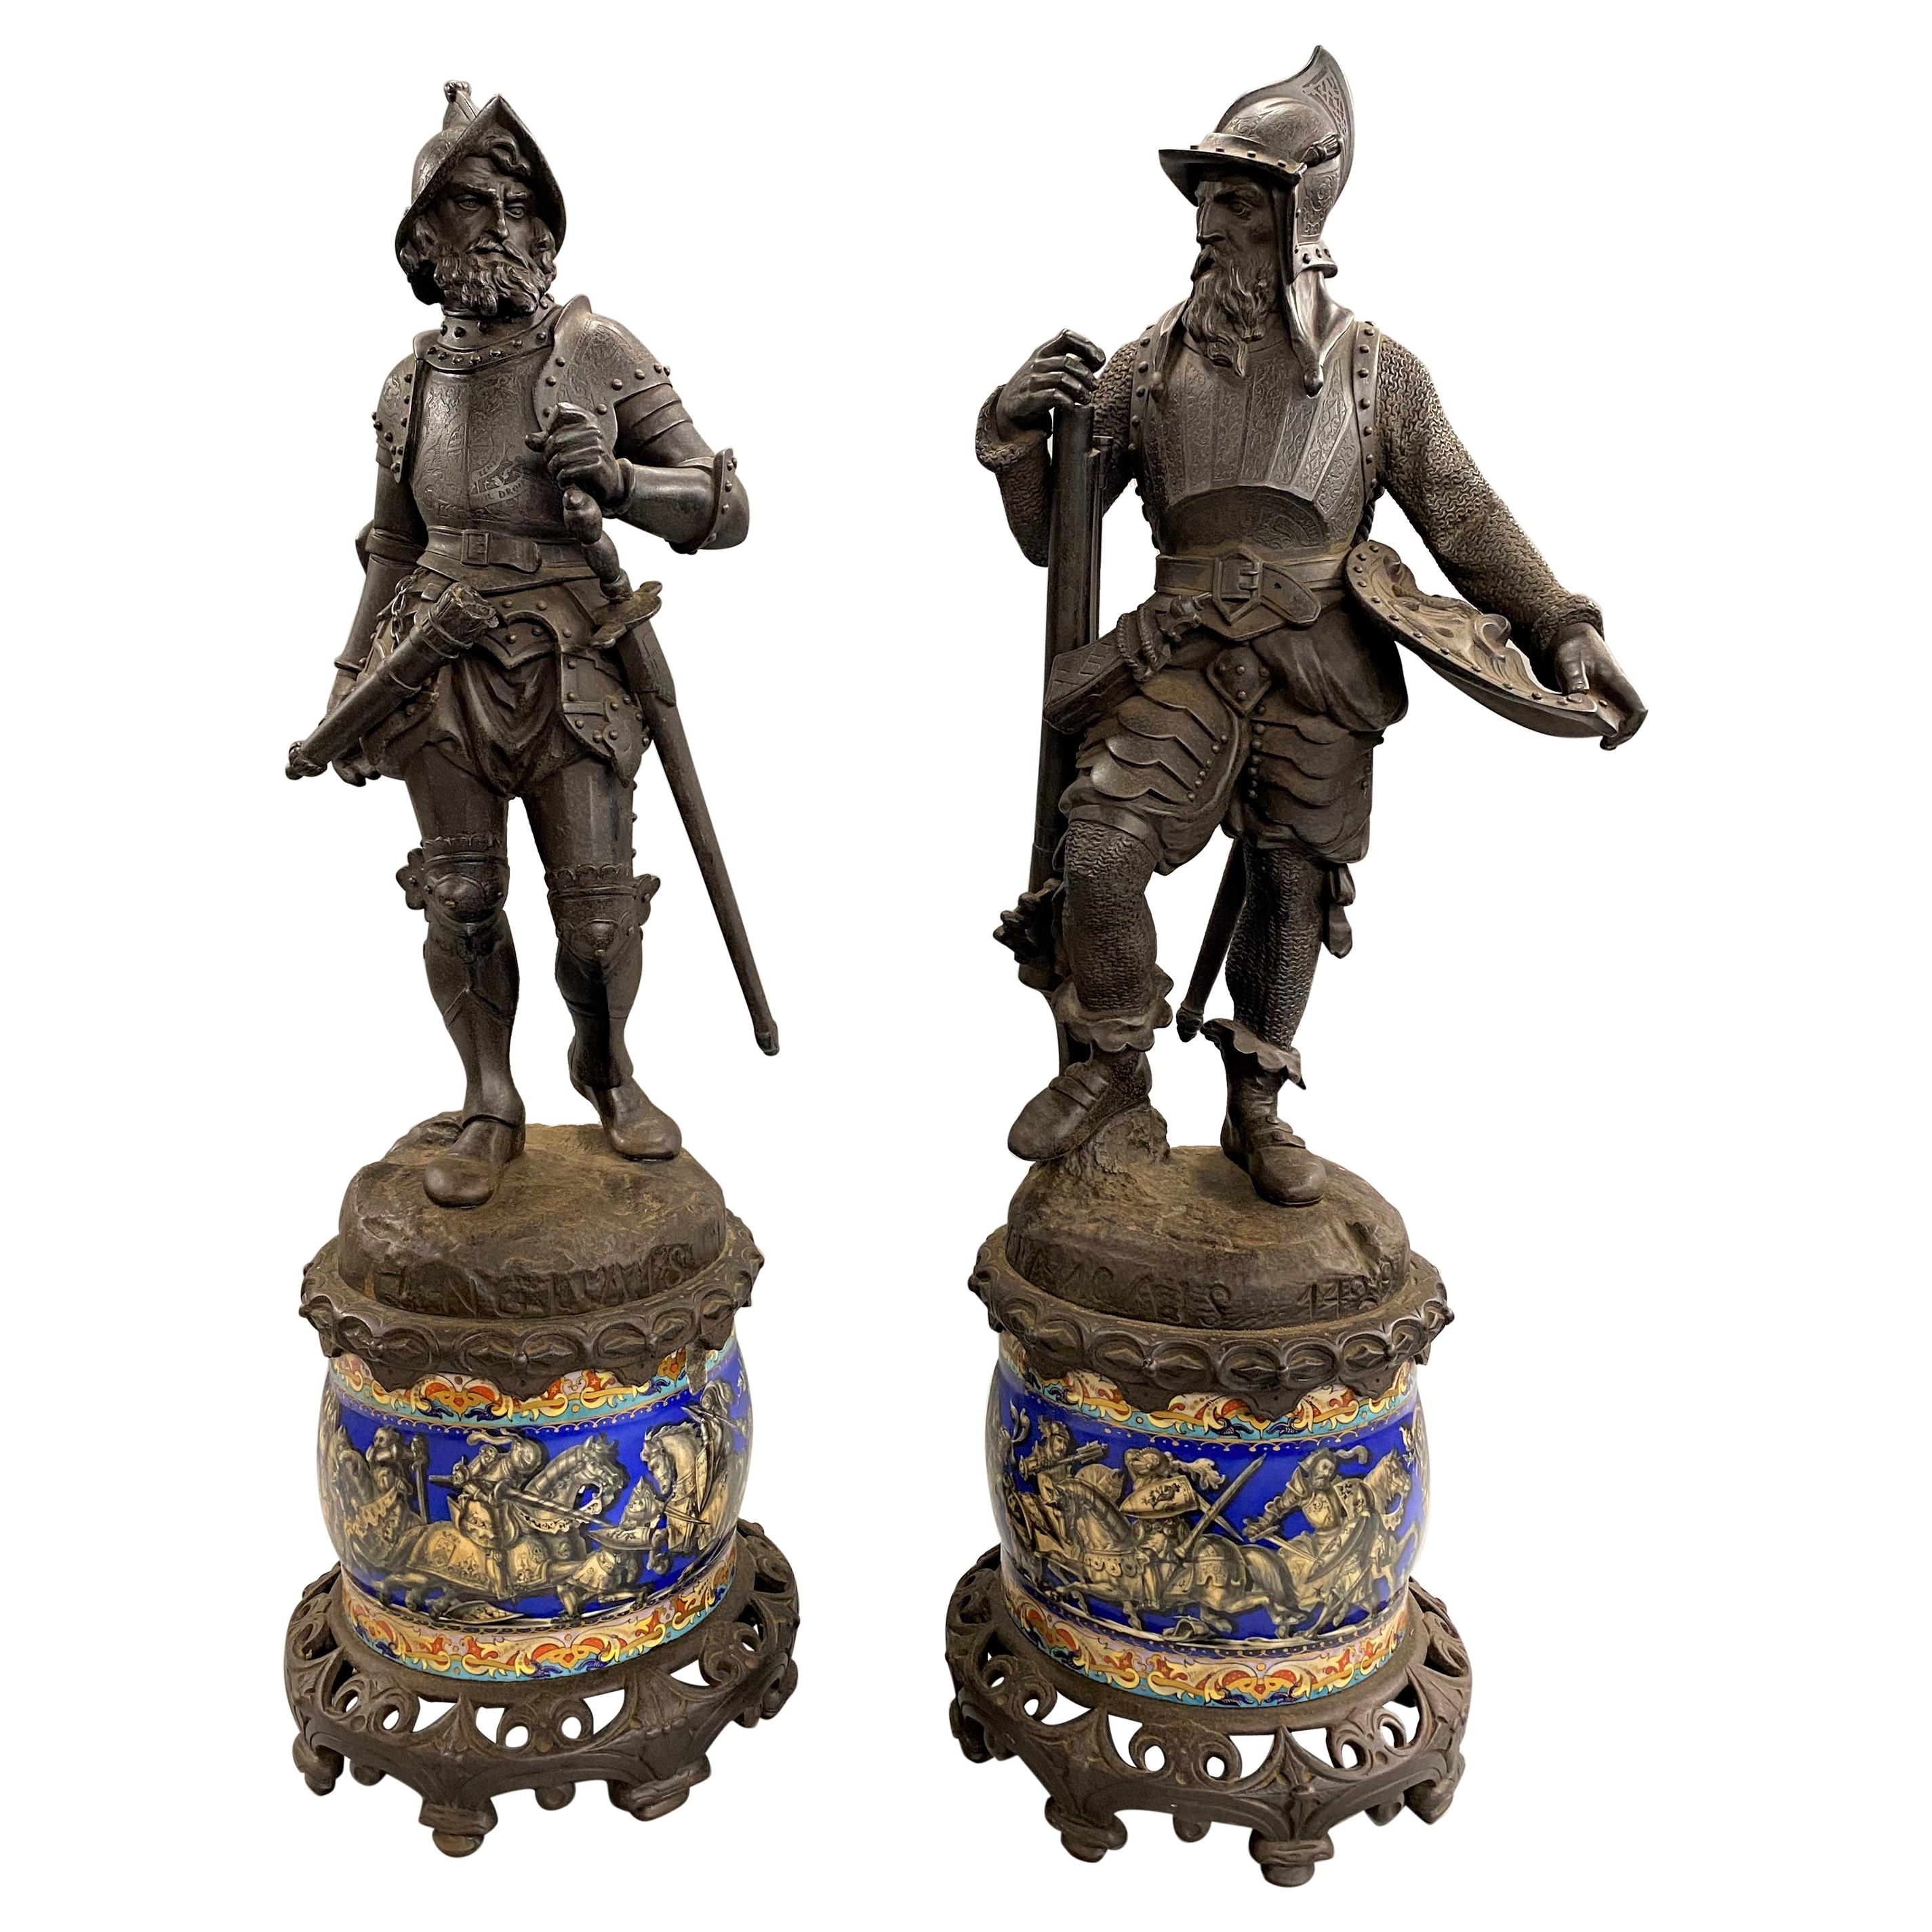 Pair of Continental Cast Iron Soldier Statues Mounted on Majolica Bases